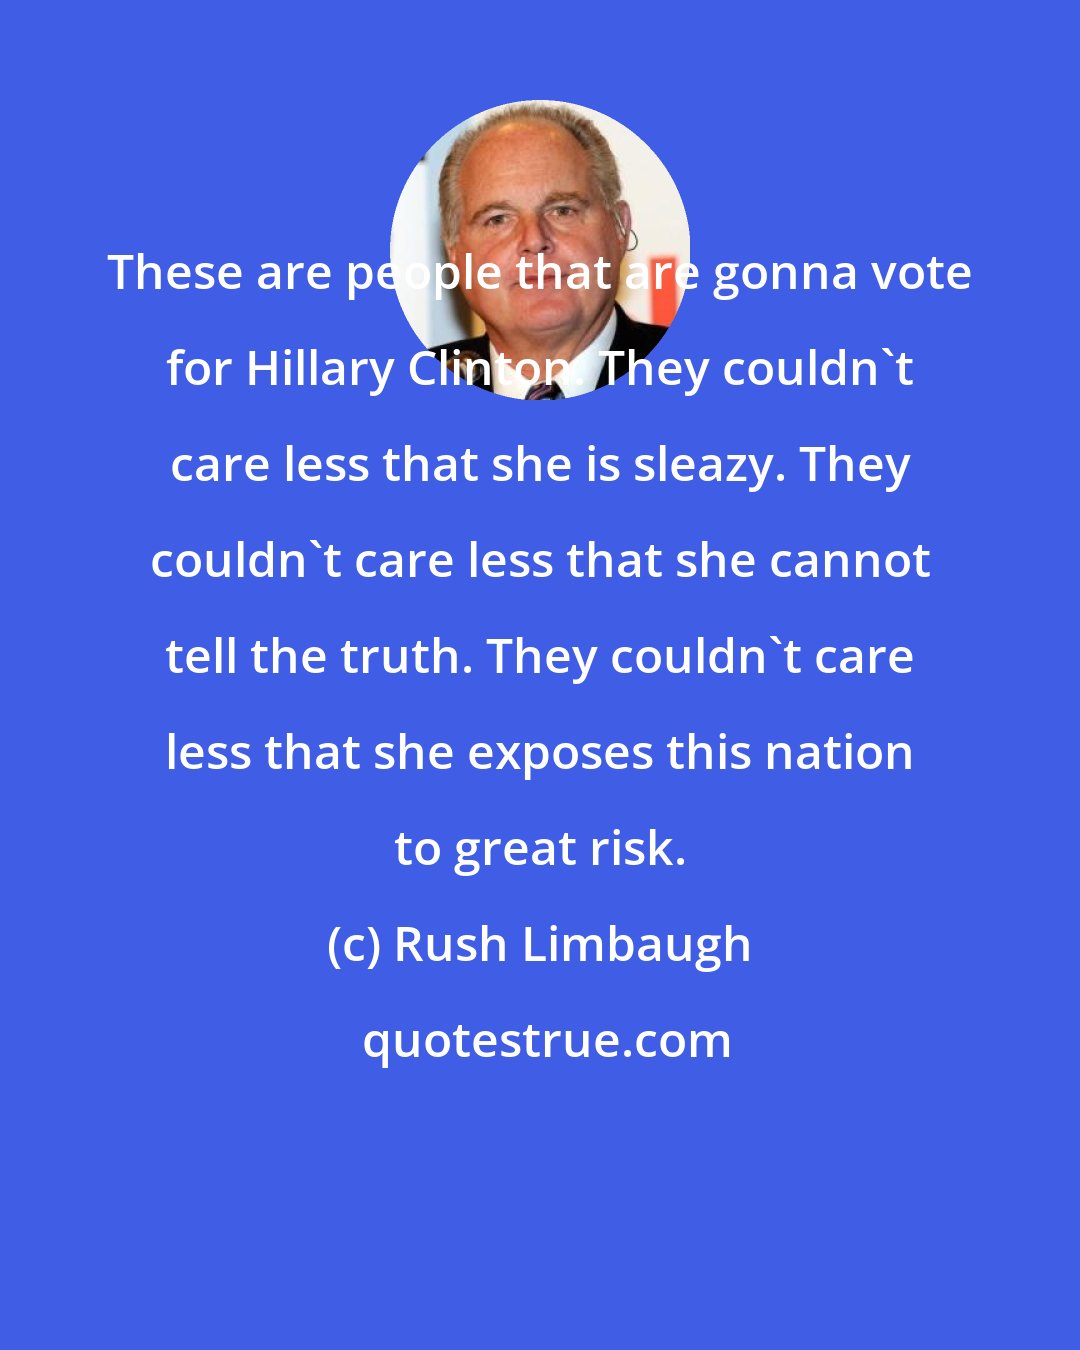 Rush Limbaugh: These are people that are gonna vote for Hillary Clinton. They couldn't care less that she is sleazy. They couldn't care less that she cannot tell the truth. They couldn't care less that she exposes this nation to great risk.